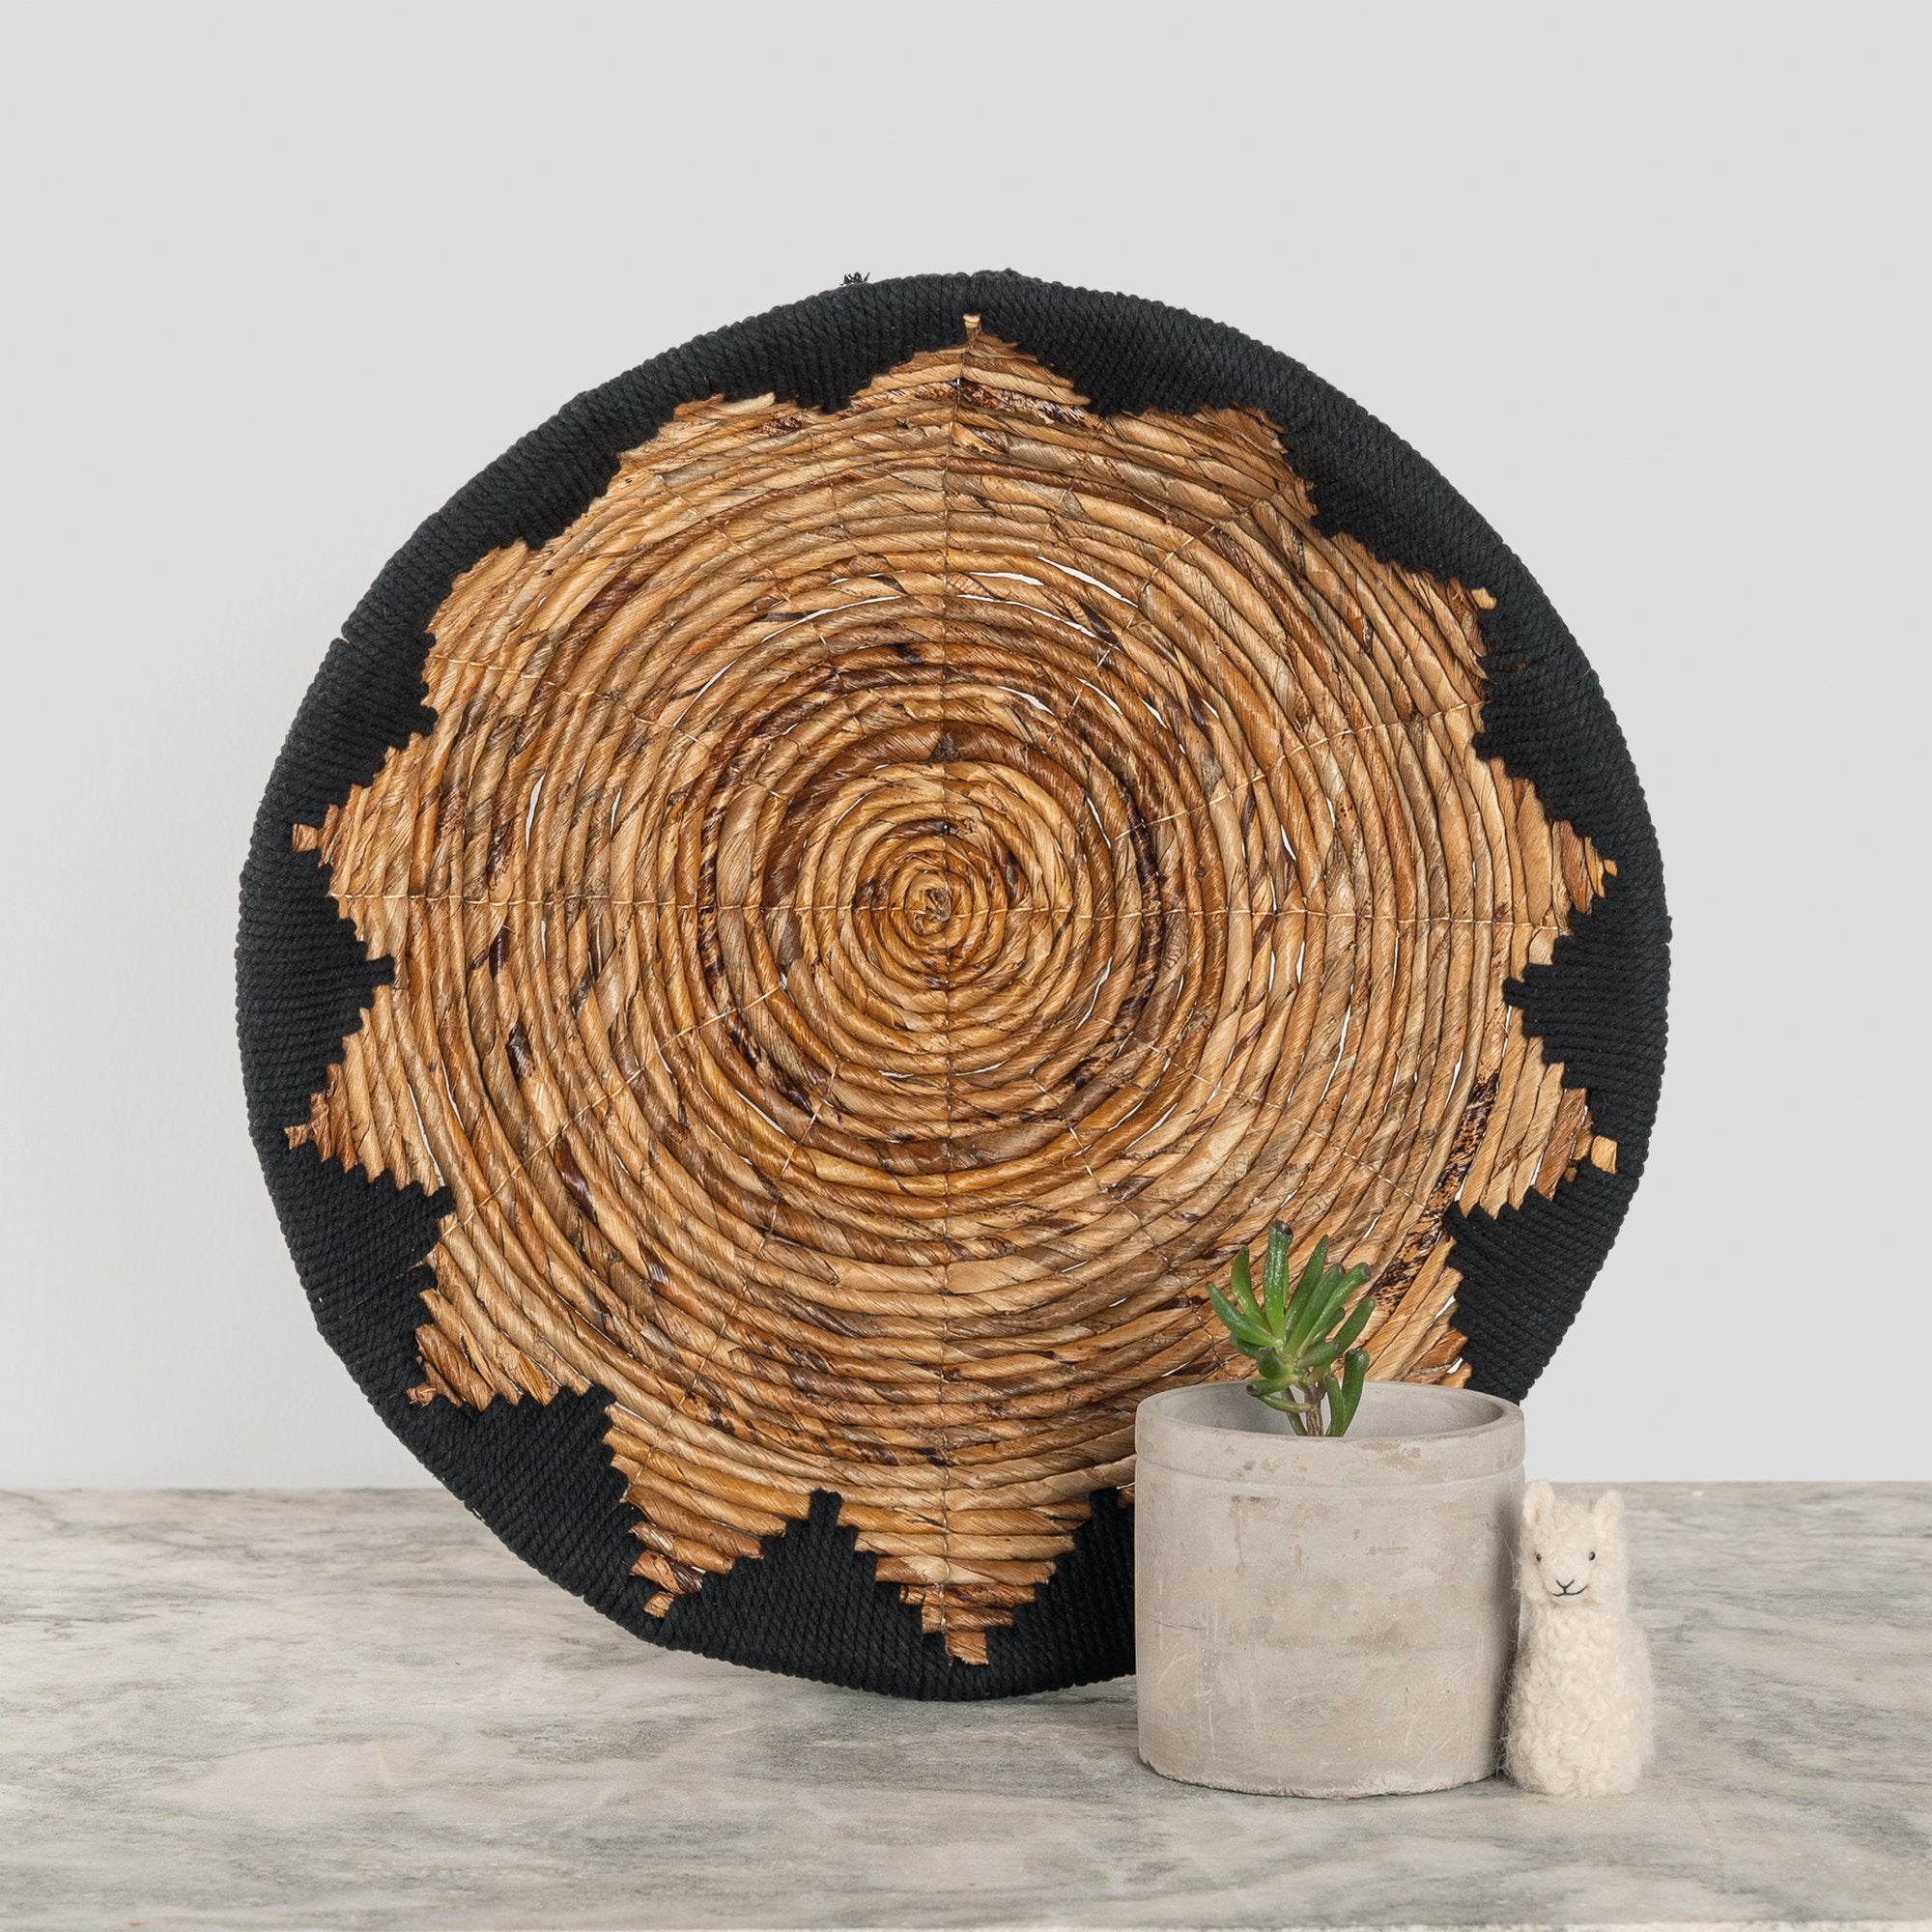 Fair Trade Rounded Wall Basket~ Black